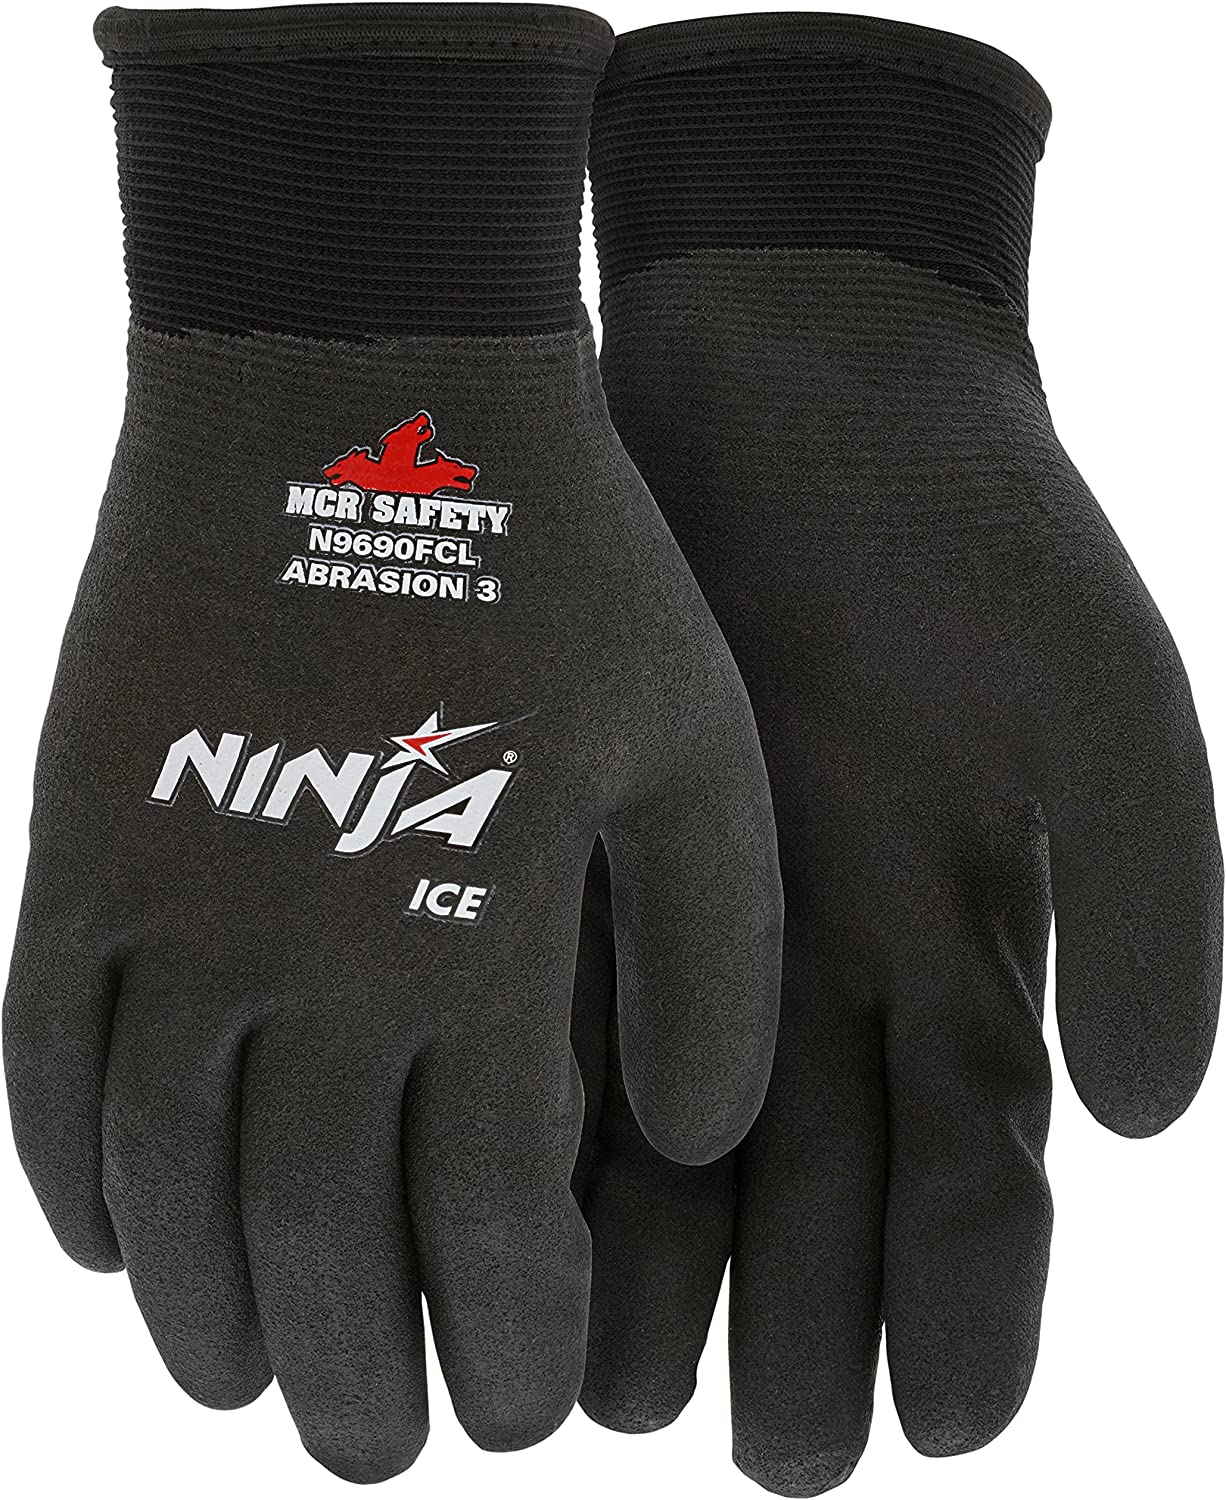 MCR Safety Ninja® Ice Insulated Work Gloves Cut Level 3 (12 Pack)